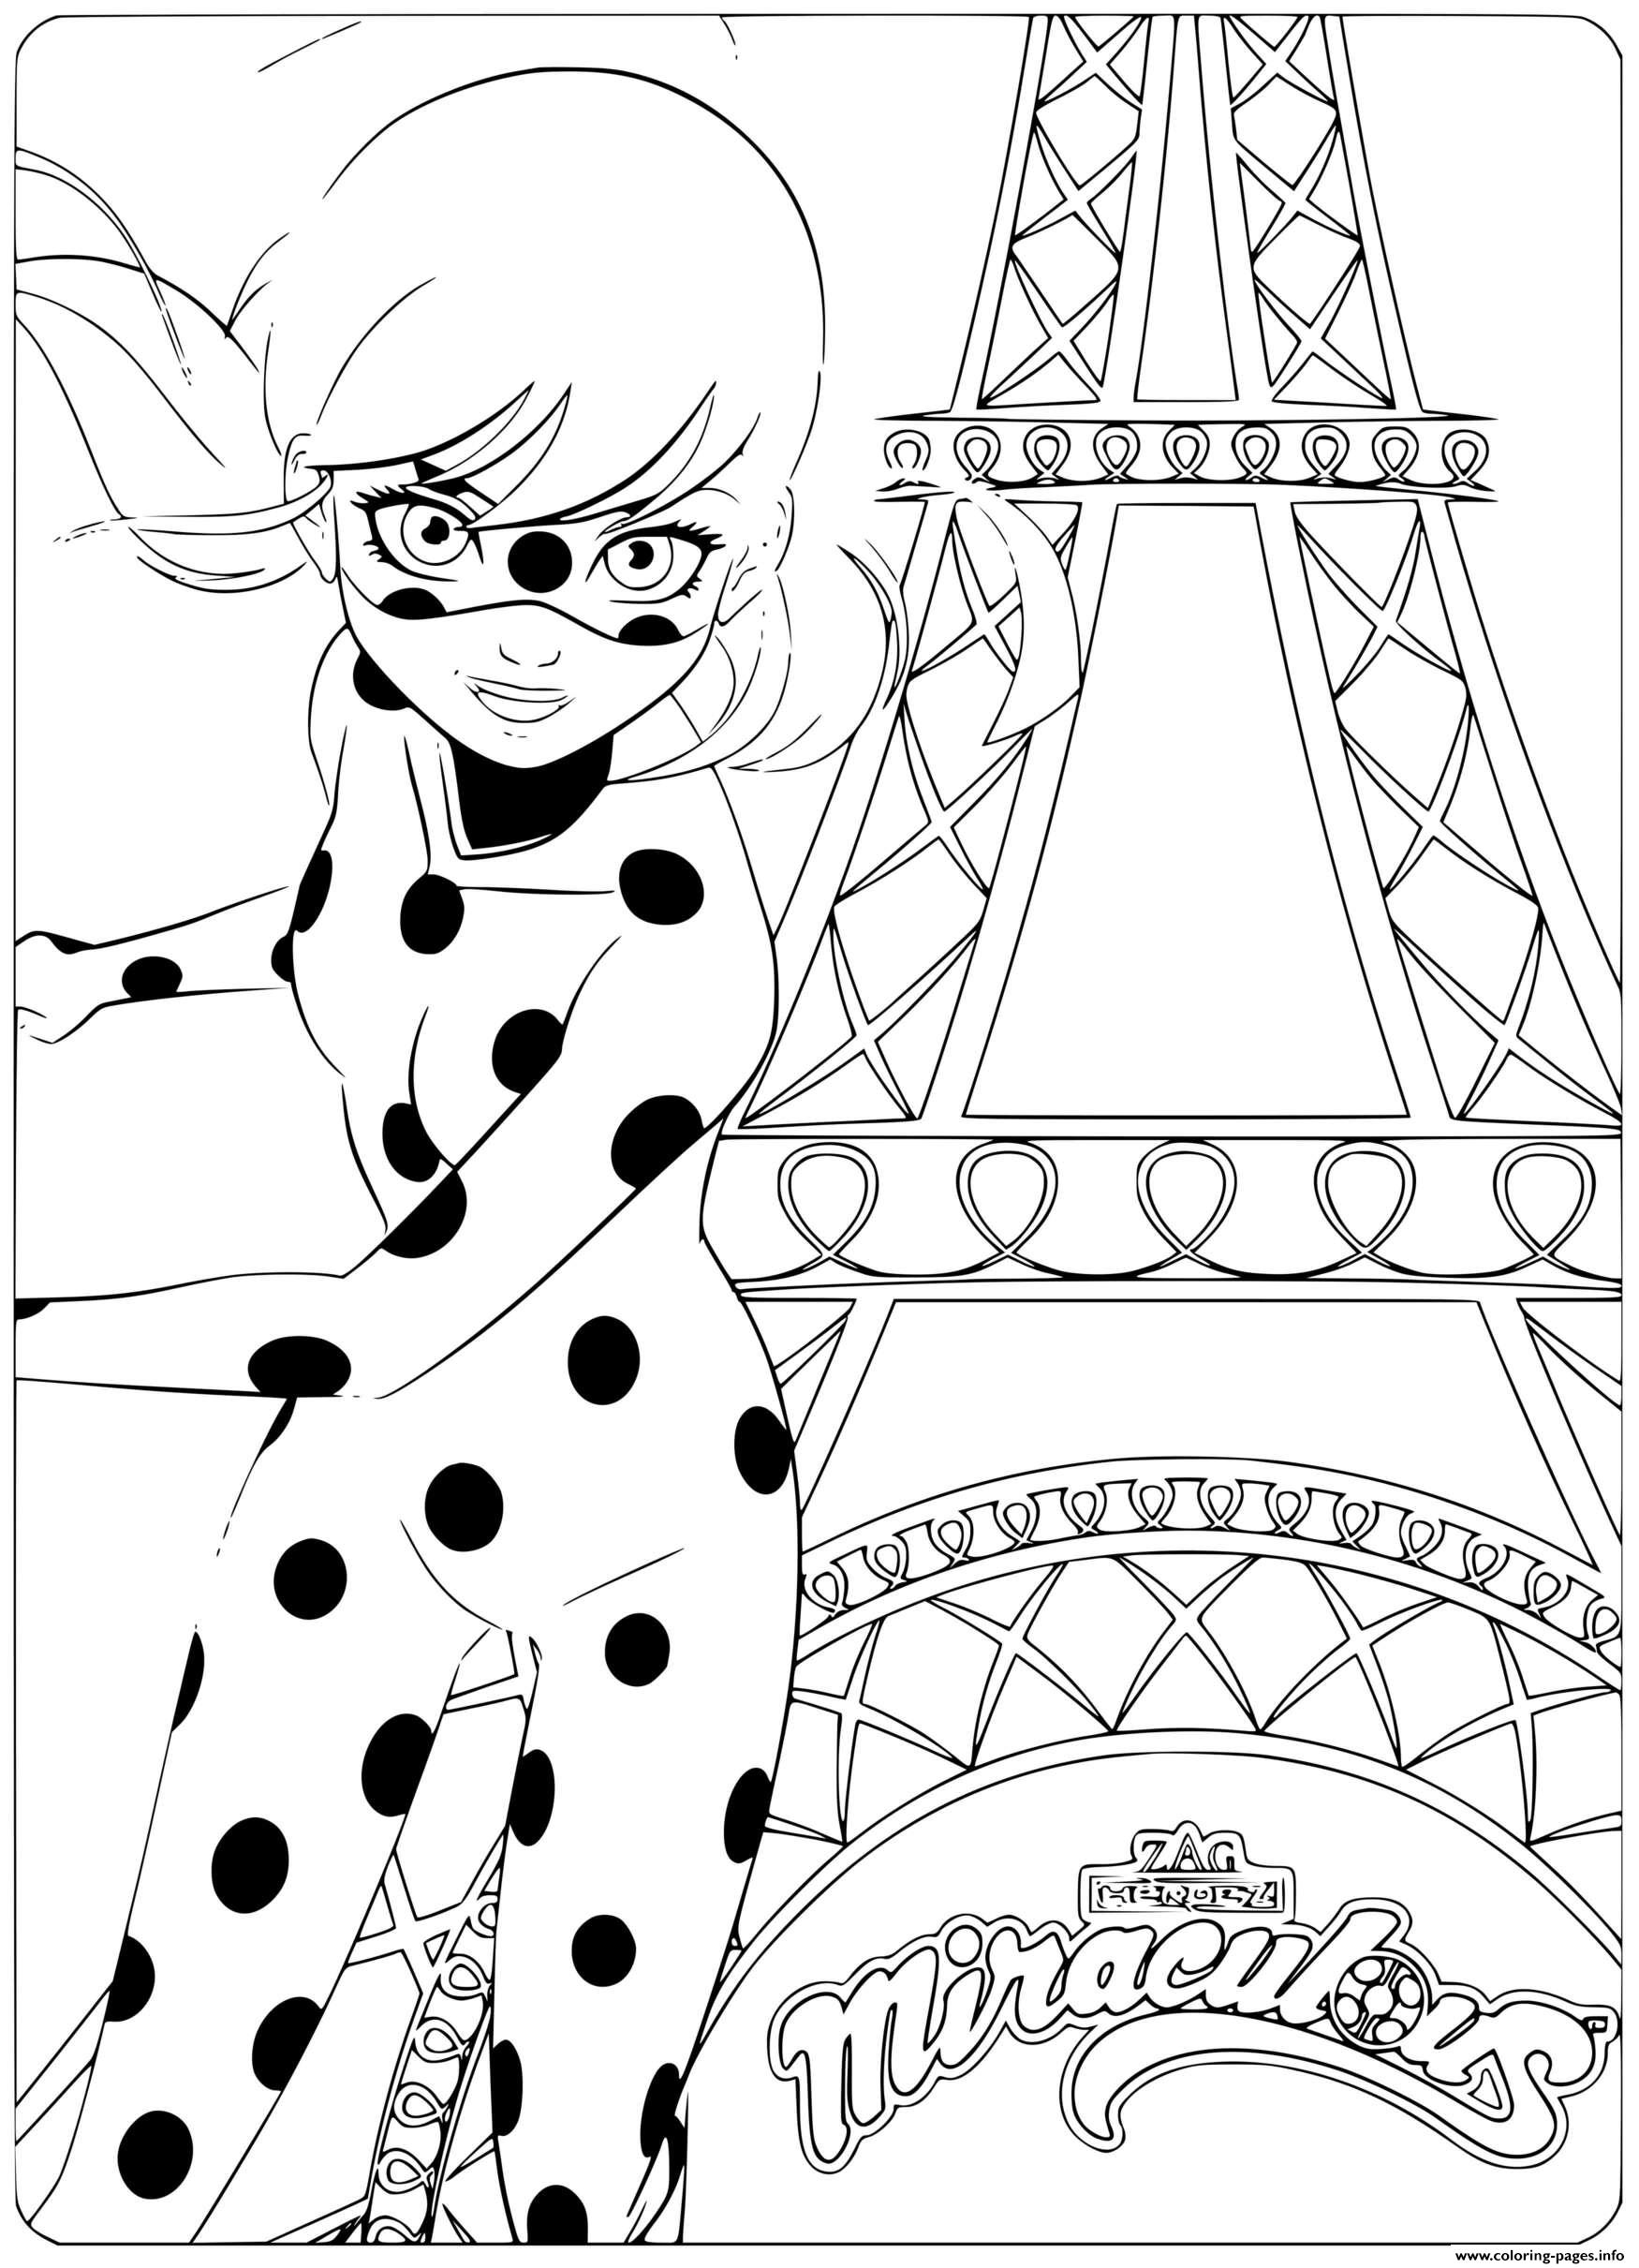 ladybug-and-cat-noir-kwami-coloring-pages-5